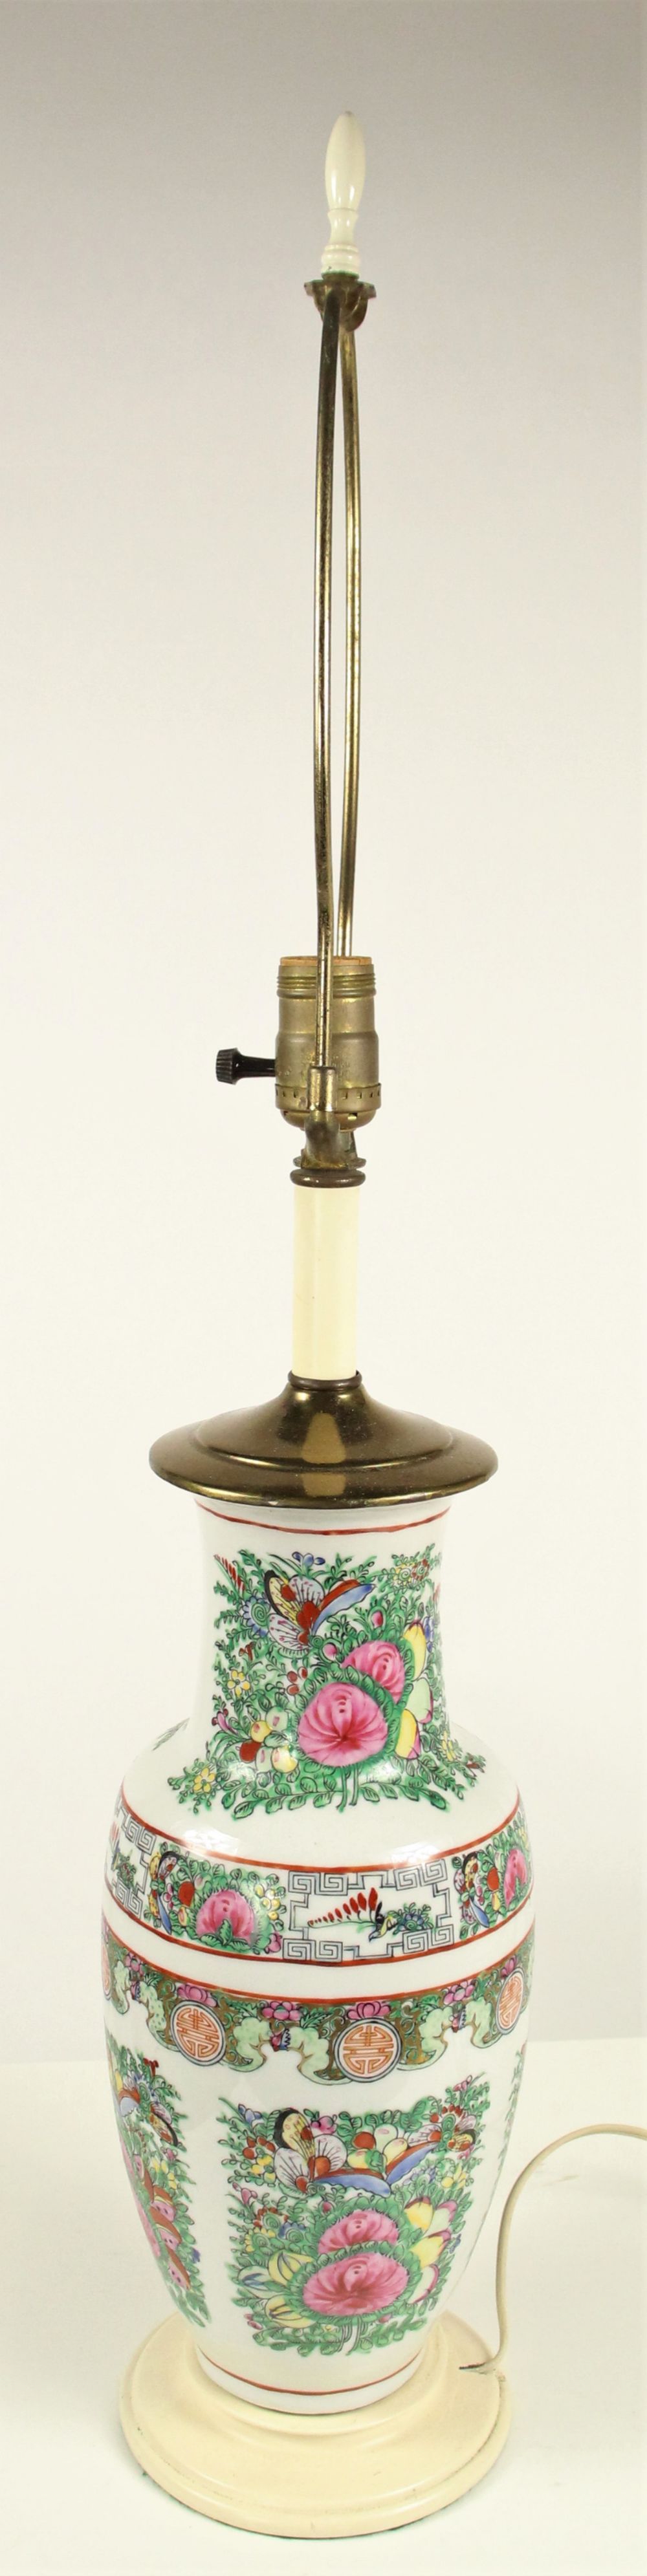 Chinese Hand Painted Lamp - Image 6 of 10